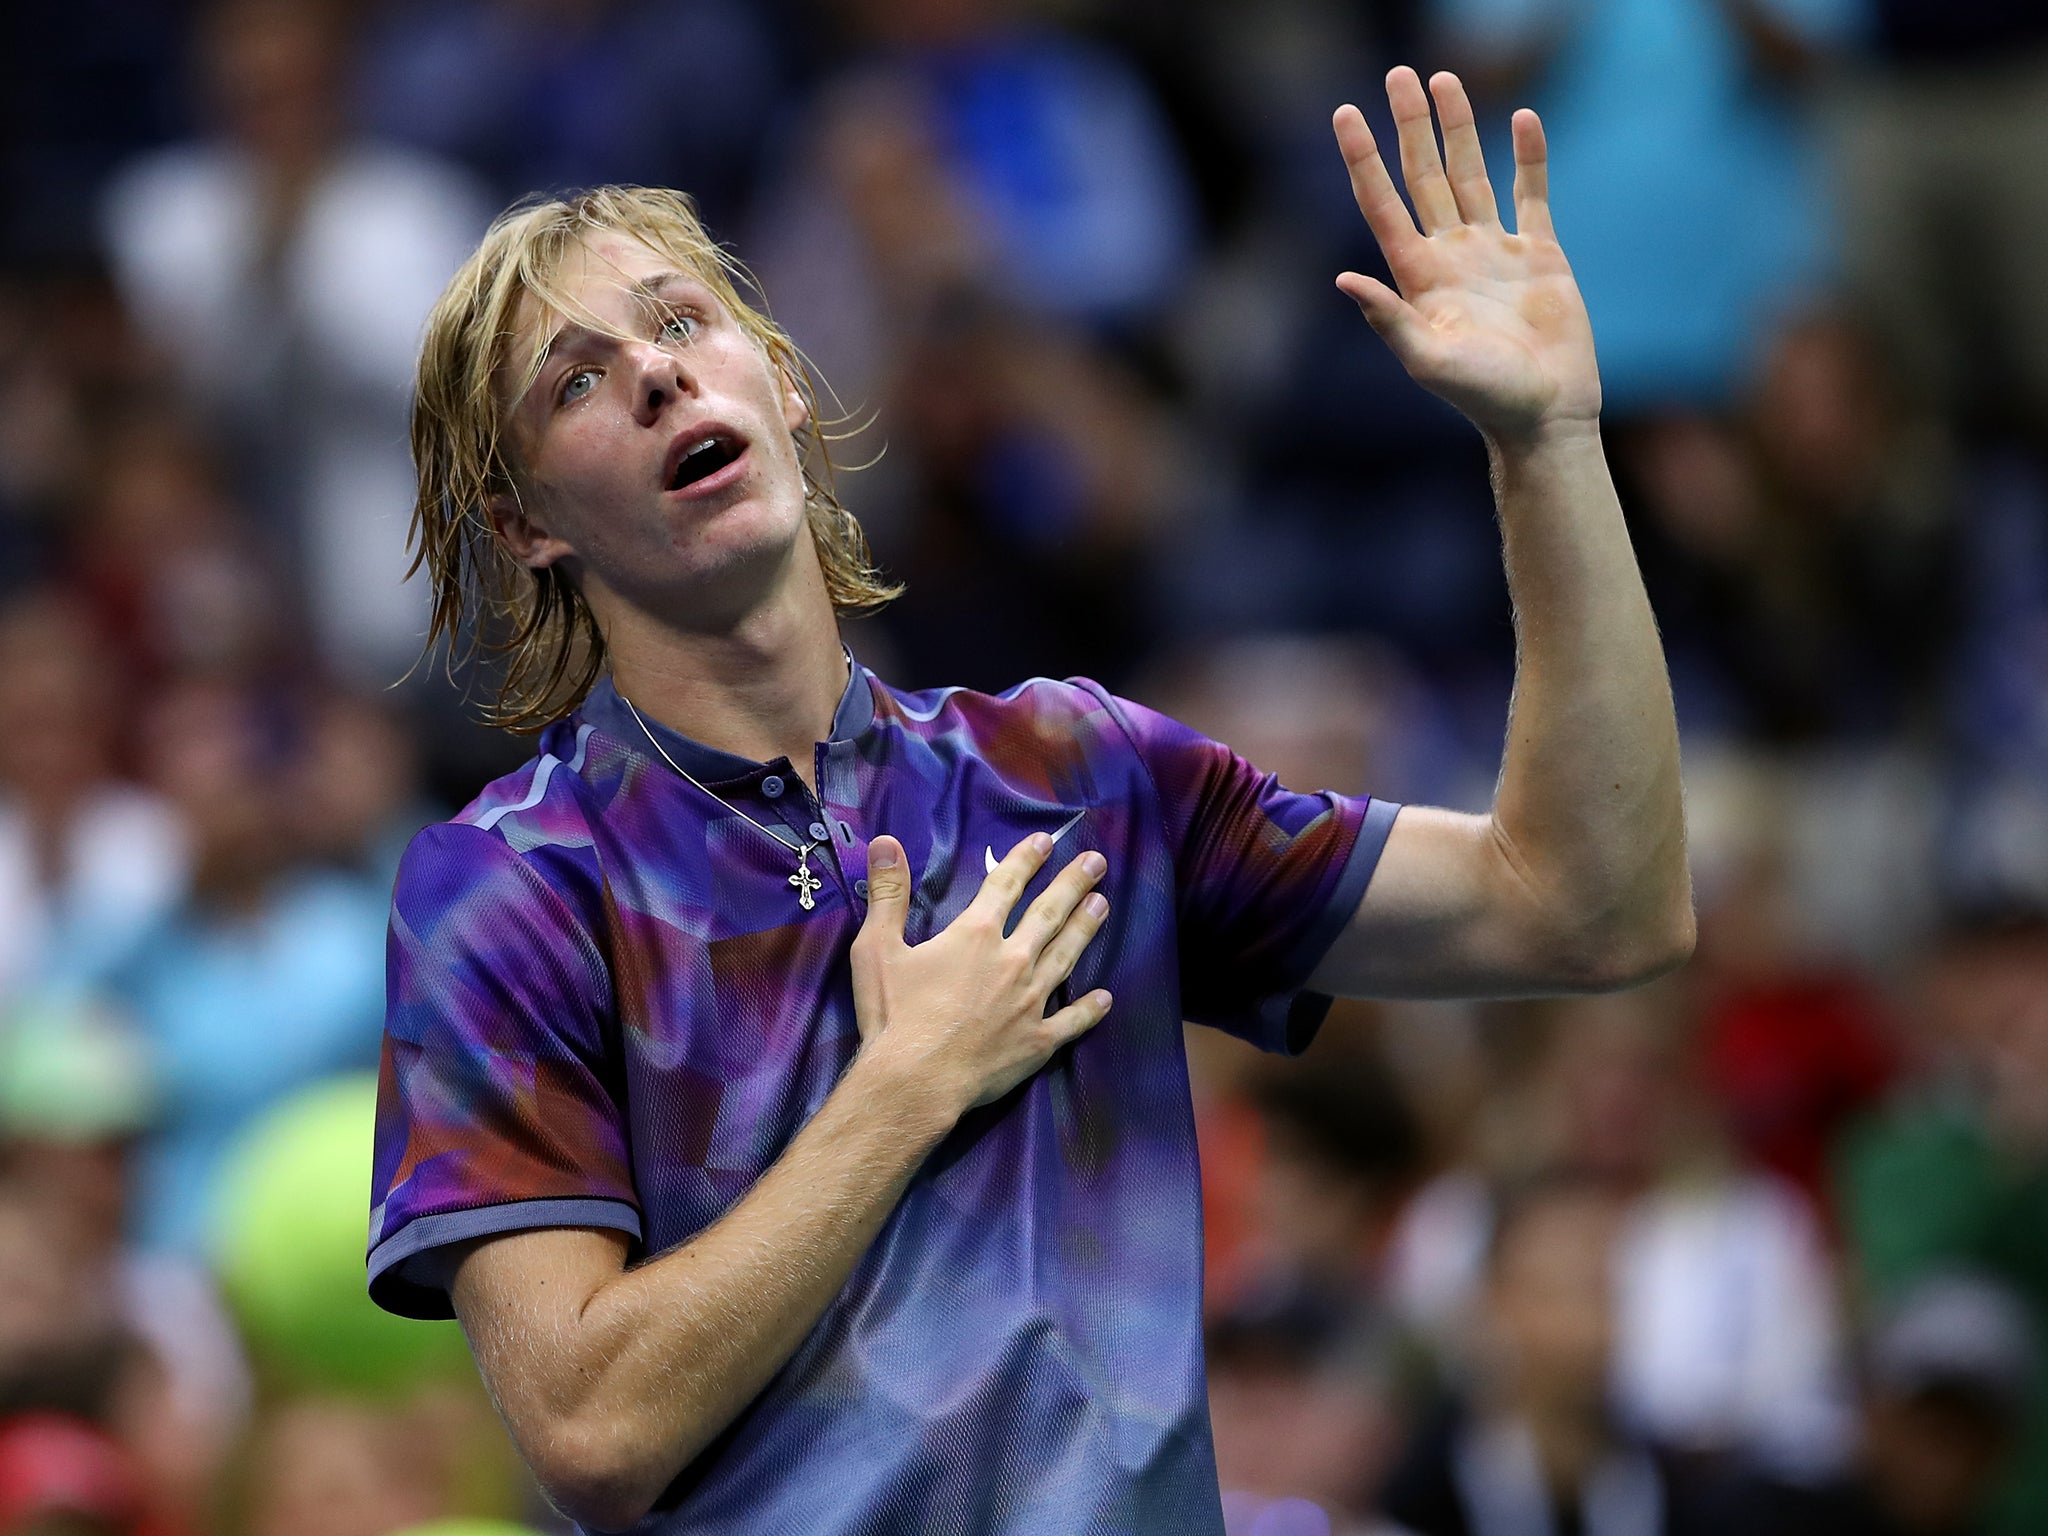 Shapovalov soaked up the applause as he left the court